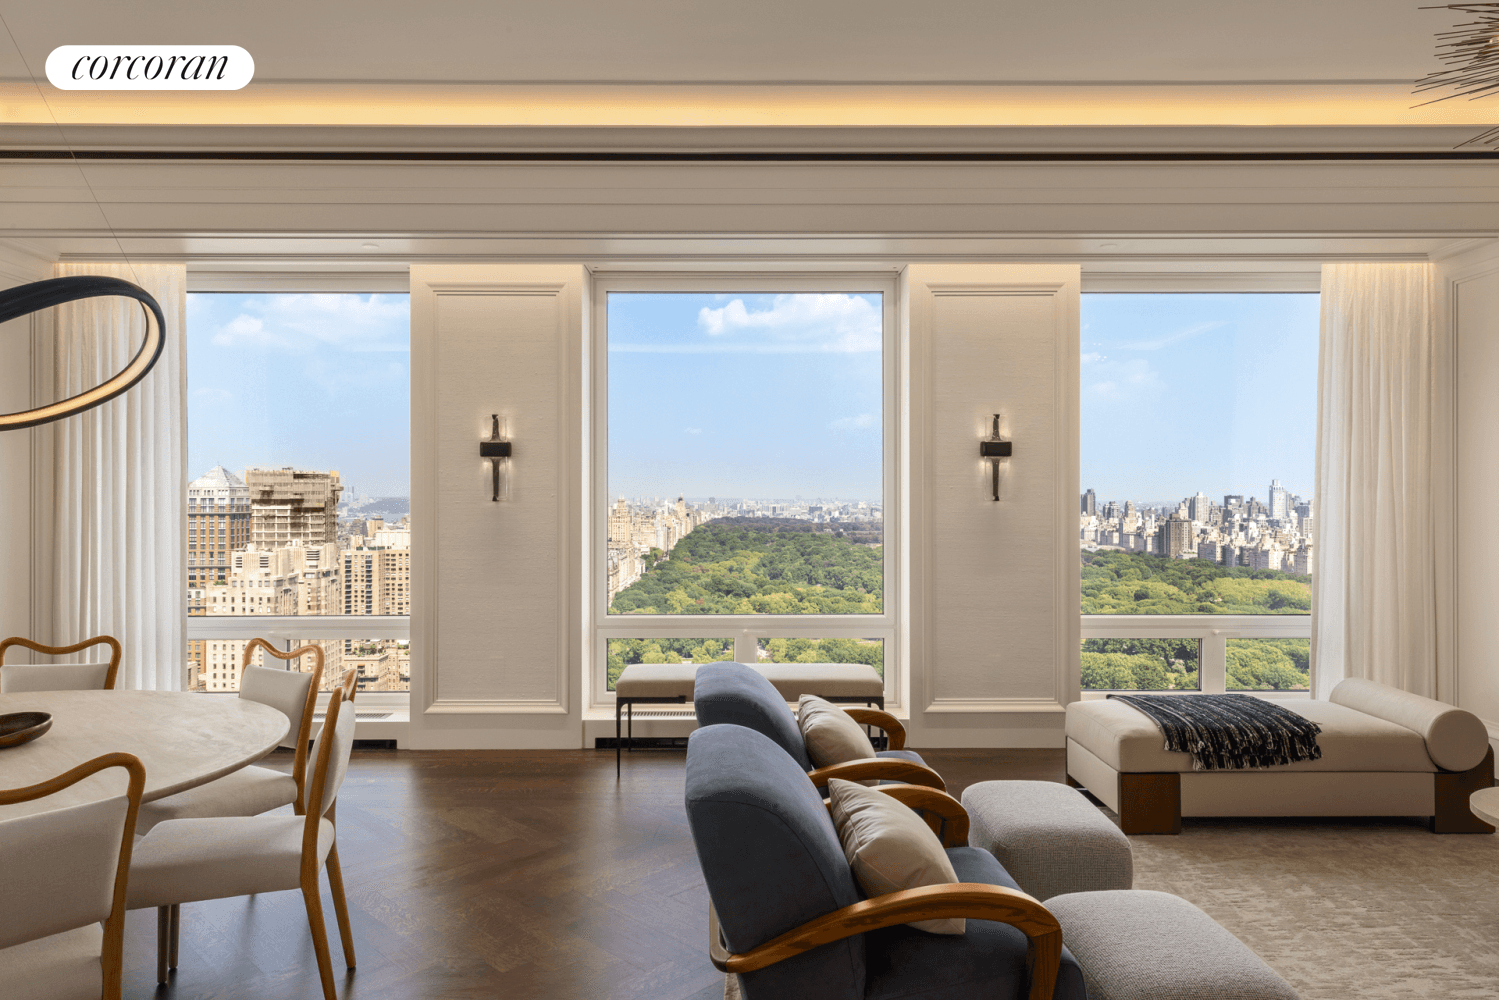 220 Central Park South's 39A is a 3, 112 SF three bedroom, three bathroom plus powder room home, offering 3 exposures north to expansive Central Park views from the living ...